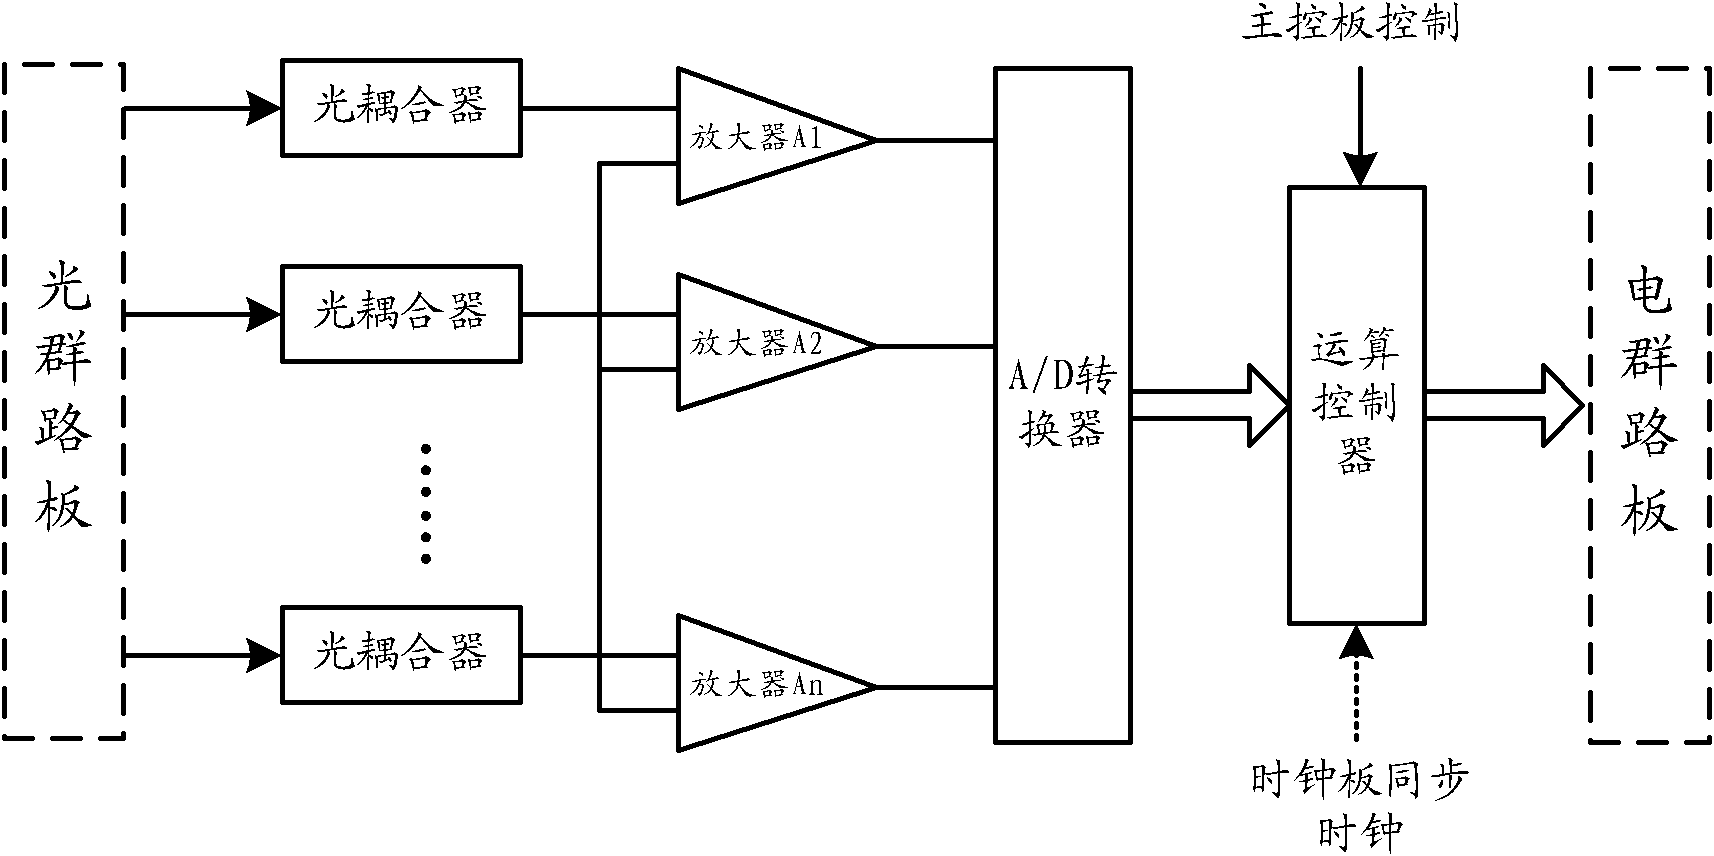 Operational decision making system of lumped control multi-type heterogeneous electricity communication network